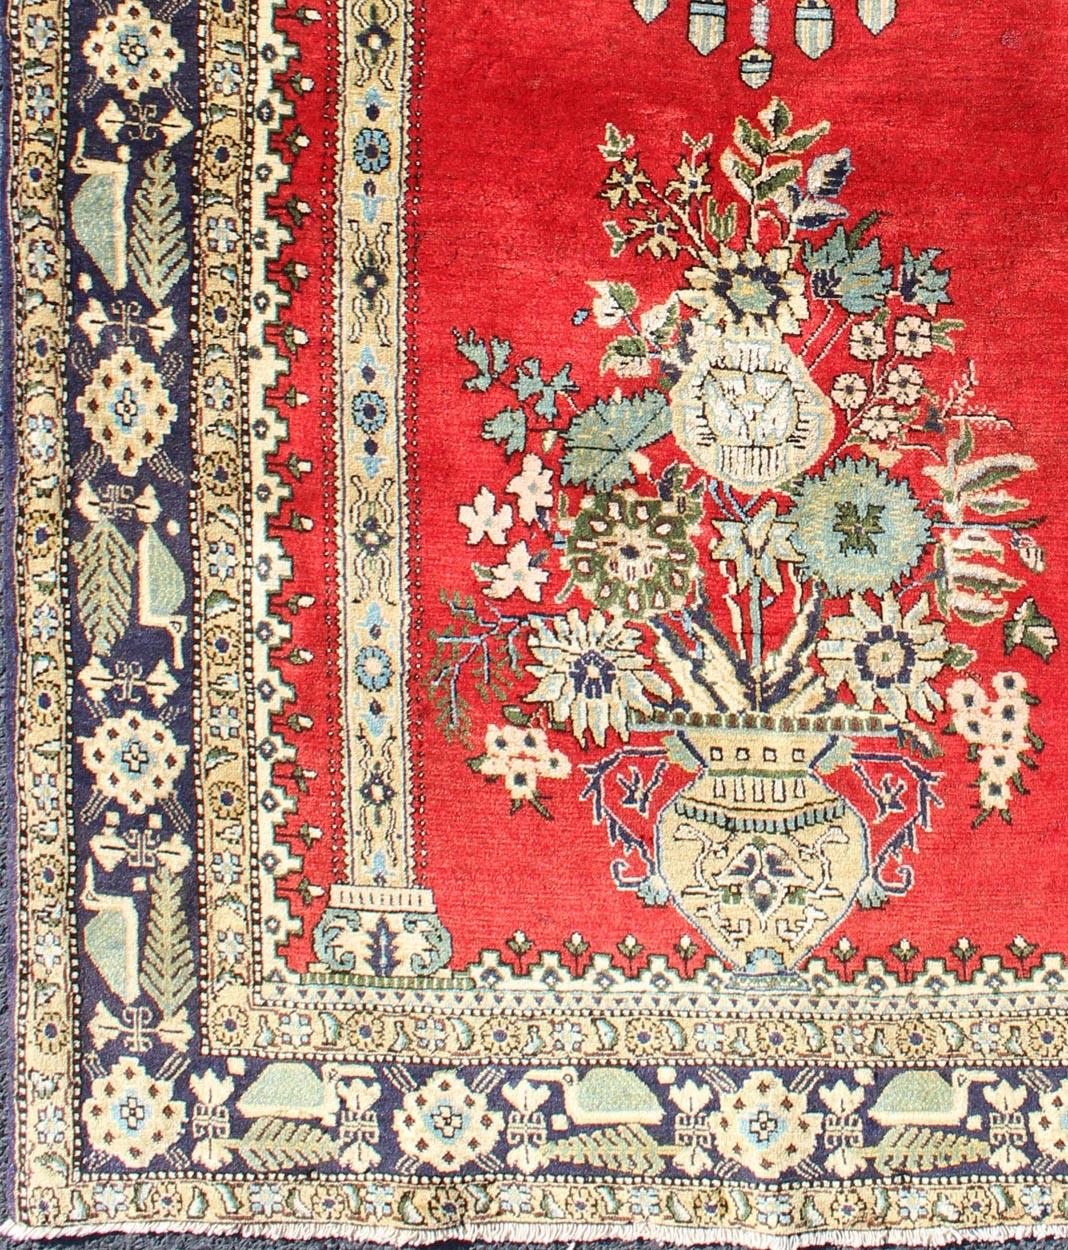 Vintage Persian Qum prayer rug with bright red field and floral bouquet chandelier Design, rug h-310-18, country of origin / type: Iran / Qum, circa 1950

This beautiful vintage Persian Qum rug bears a prayer rug design and a flower bouquet